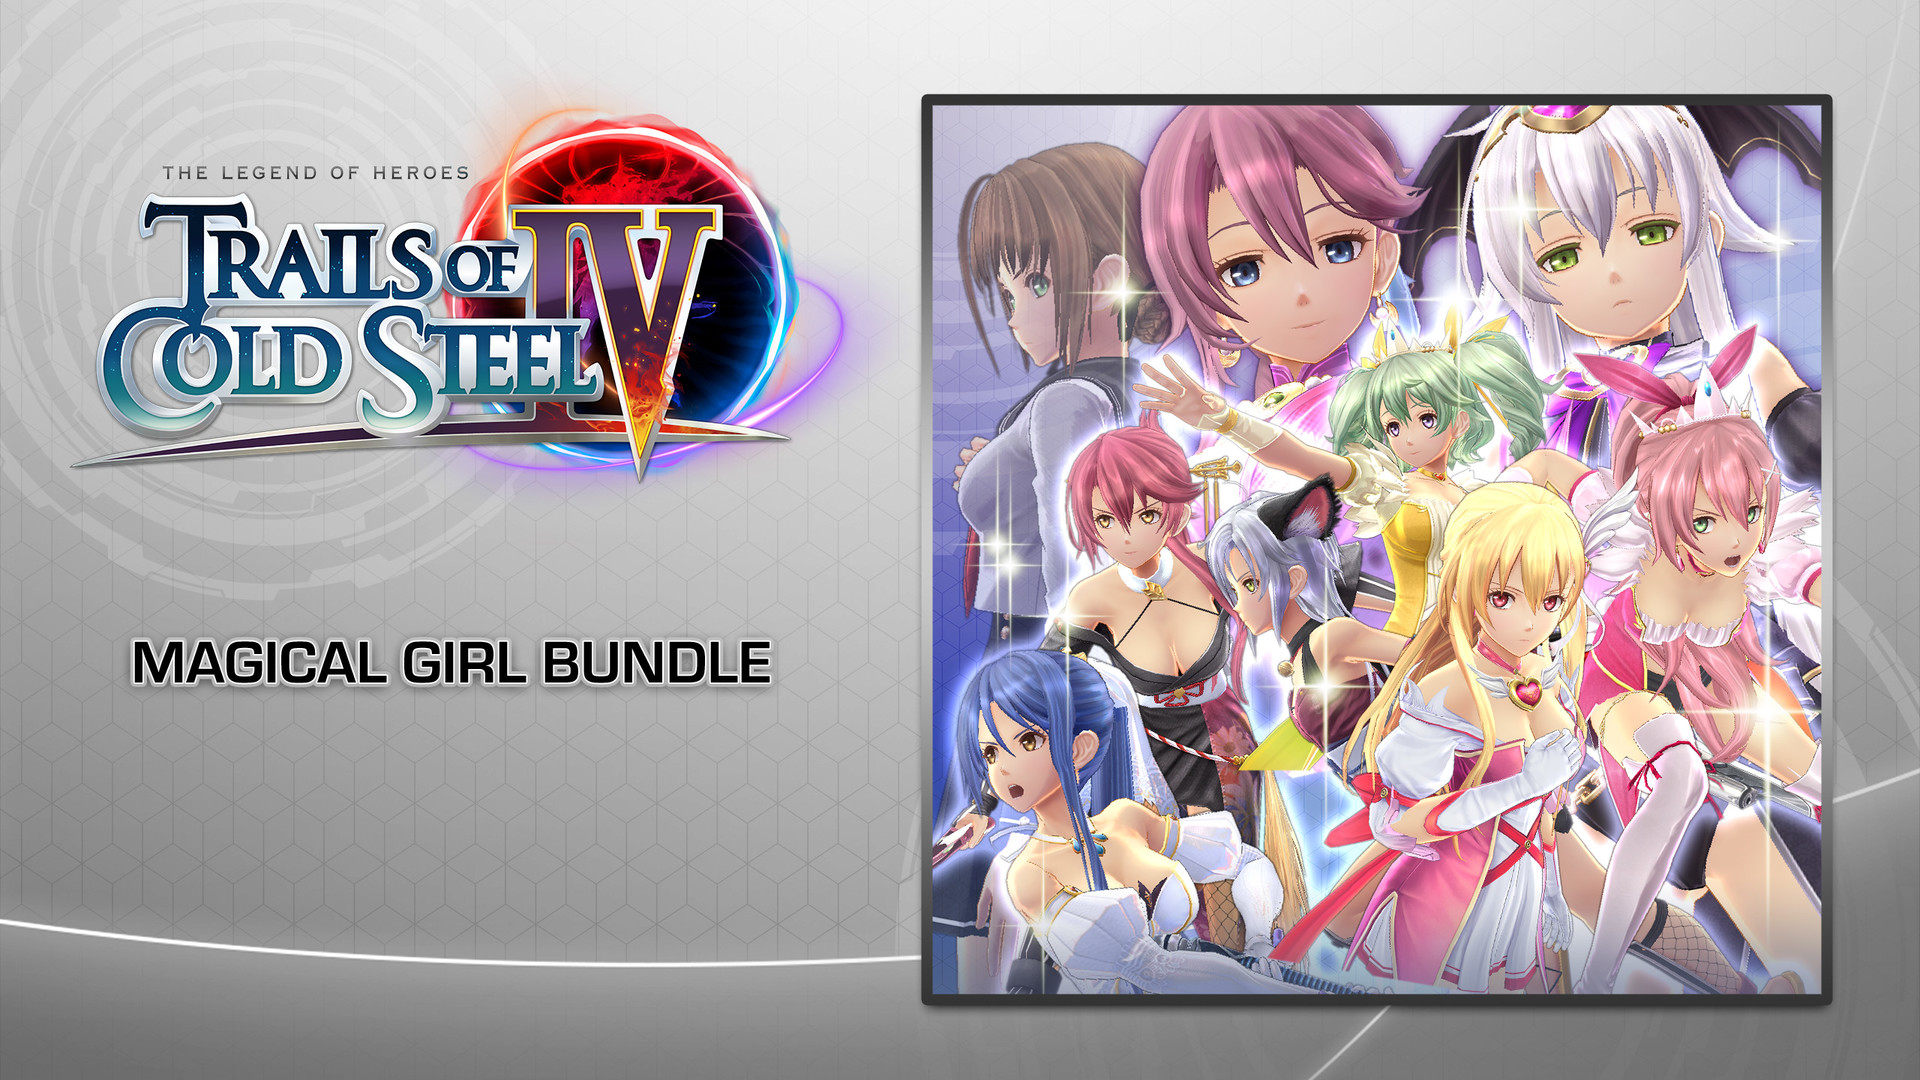 The Legend of Heroes: Trails of Cold Steel IV - Magical Girl Bundle Featured Screenshot #1